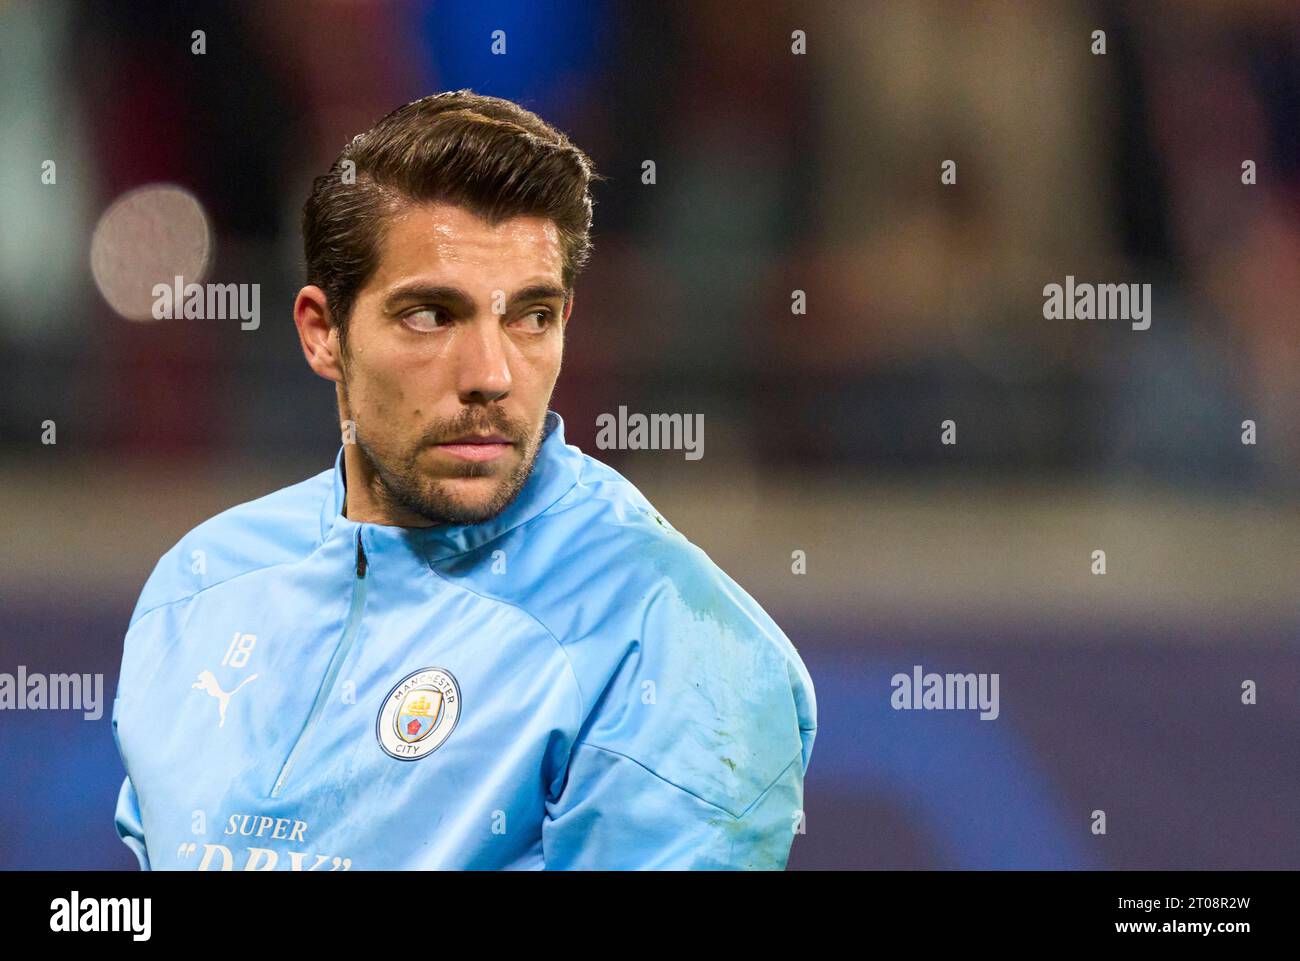 Stefan Ortega, MANCITY 18  in the group G stage match  RB LEIPZIG - MANCHESTER CITY 1-3 of football UEFA Champions League in season 2023/2024 in Leipzig, Oct 4, 2023.  Gruppenphase, , RBL, Red Bull © Peter Schatz / Alamy Live News Stock Photo